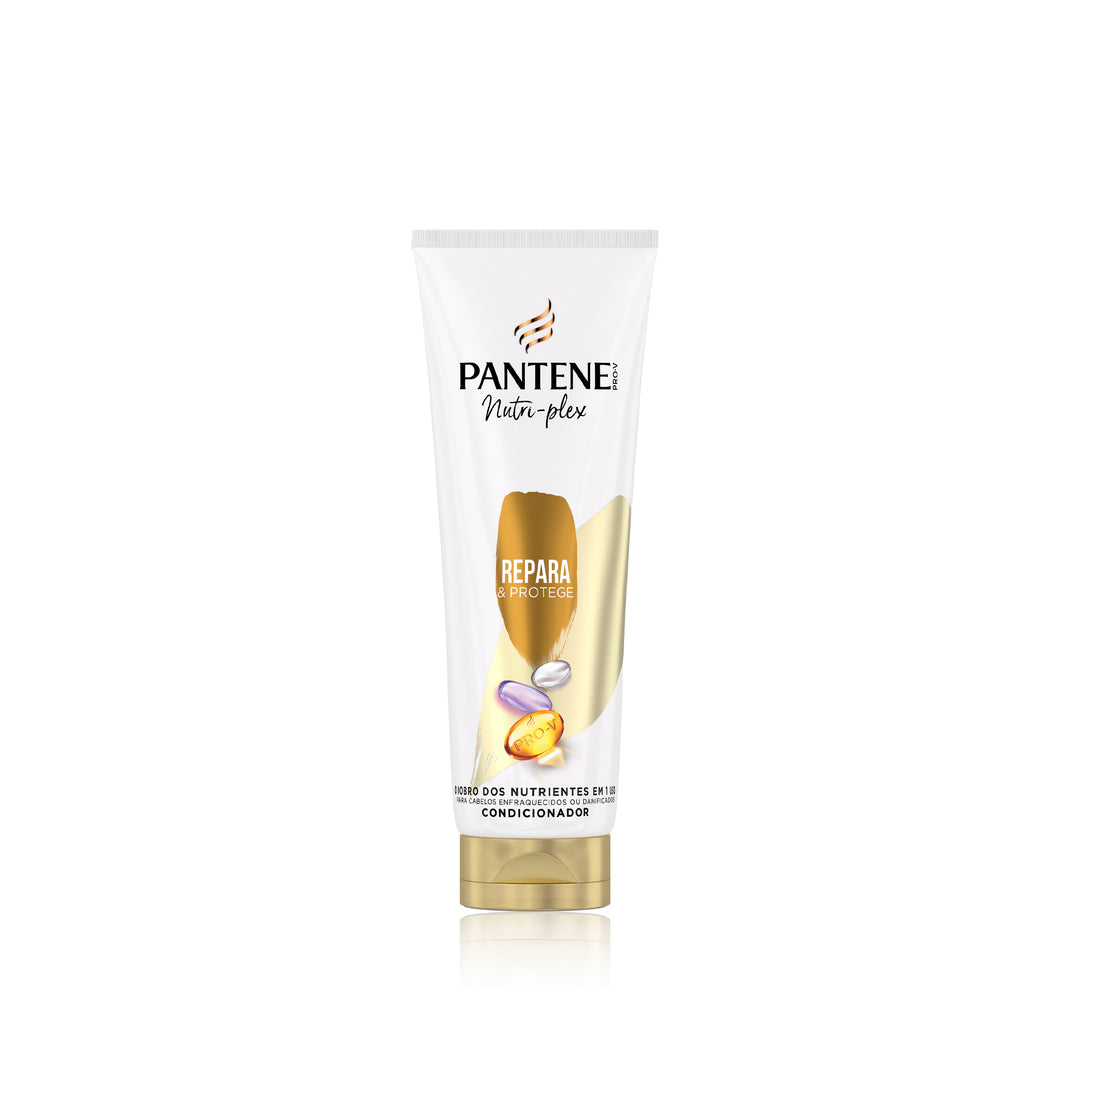 Pantene Conditioner Repairs And Protects 325 Ml